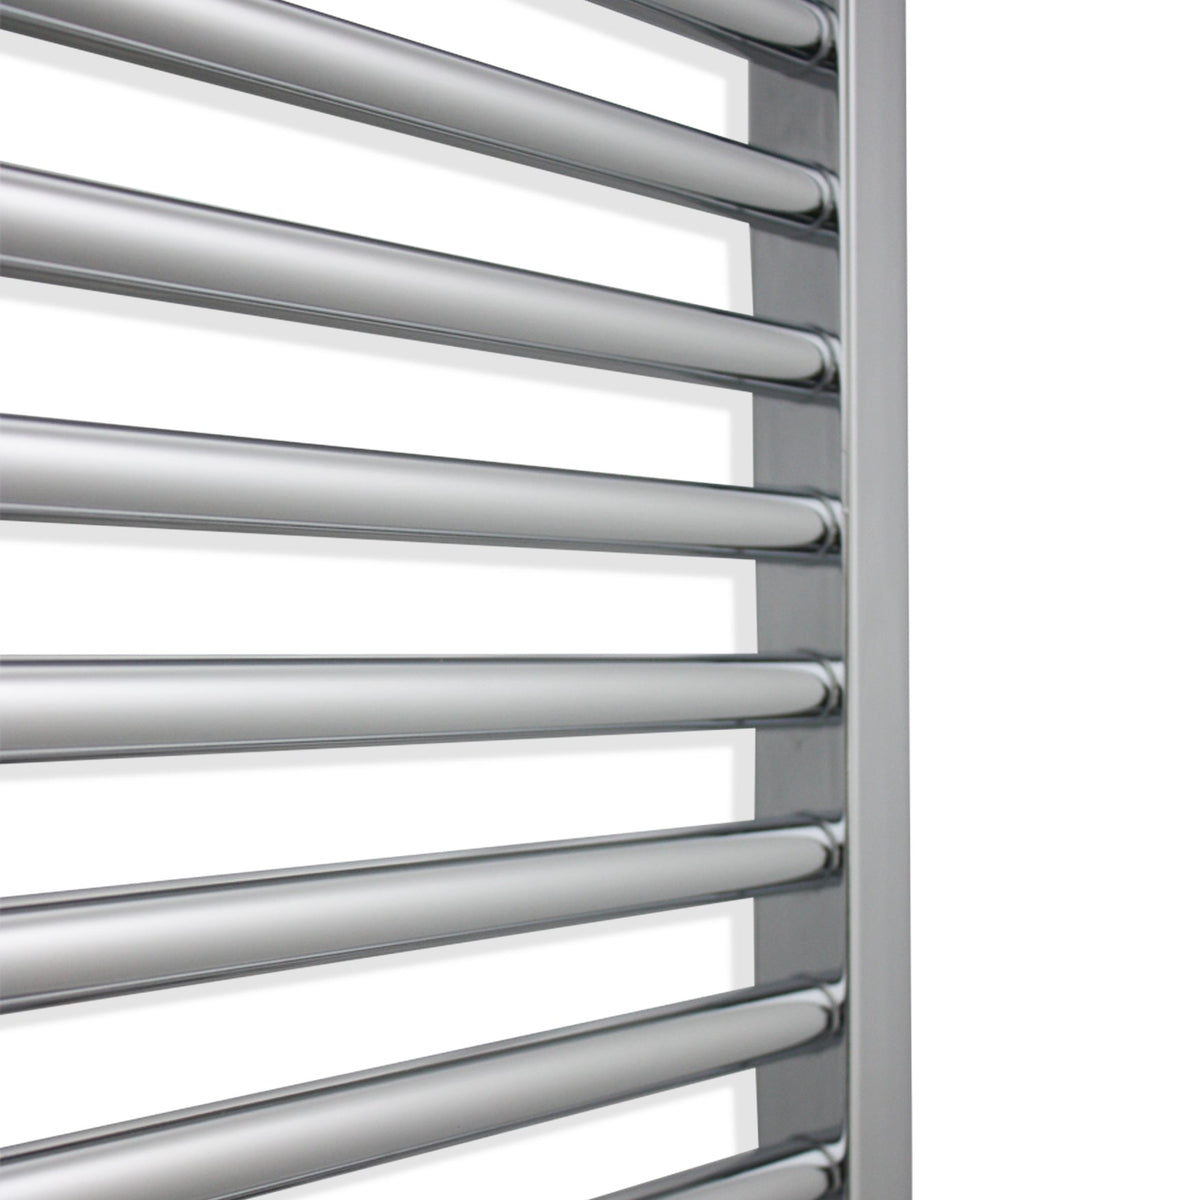 Electric Heated Chrome Towel Rail Thermostatic Close Up Image